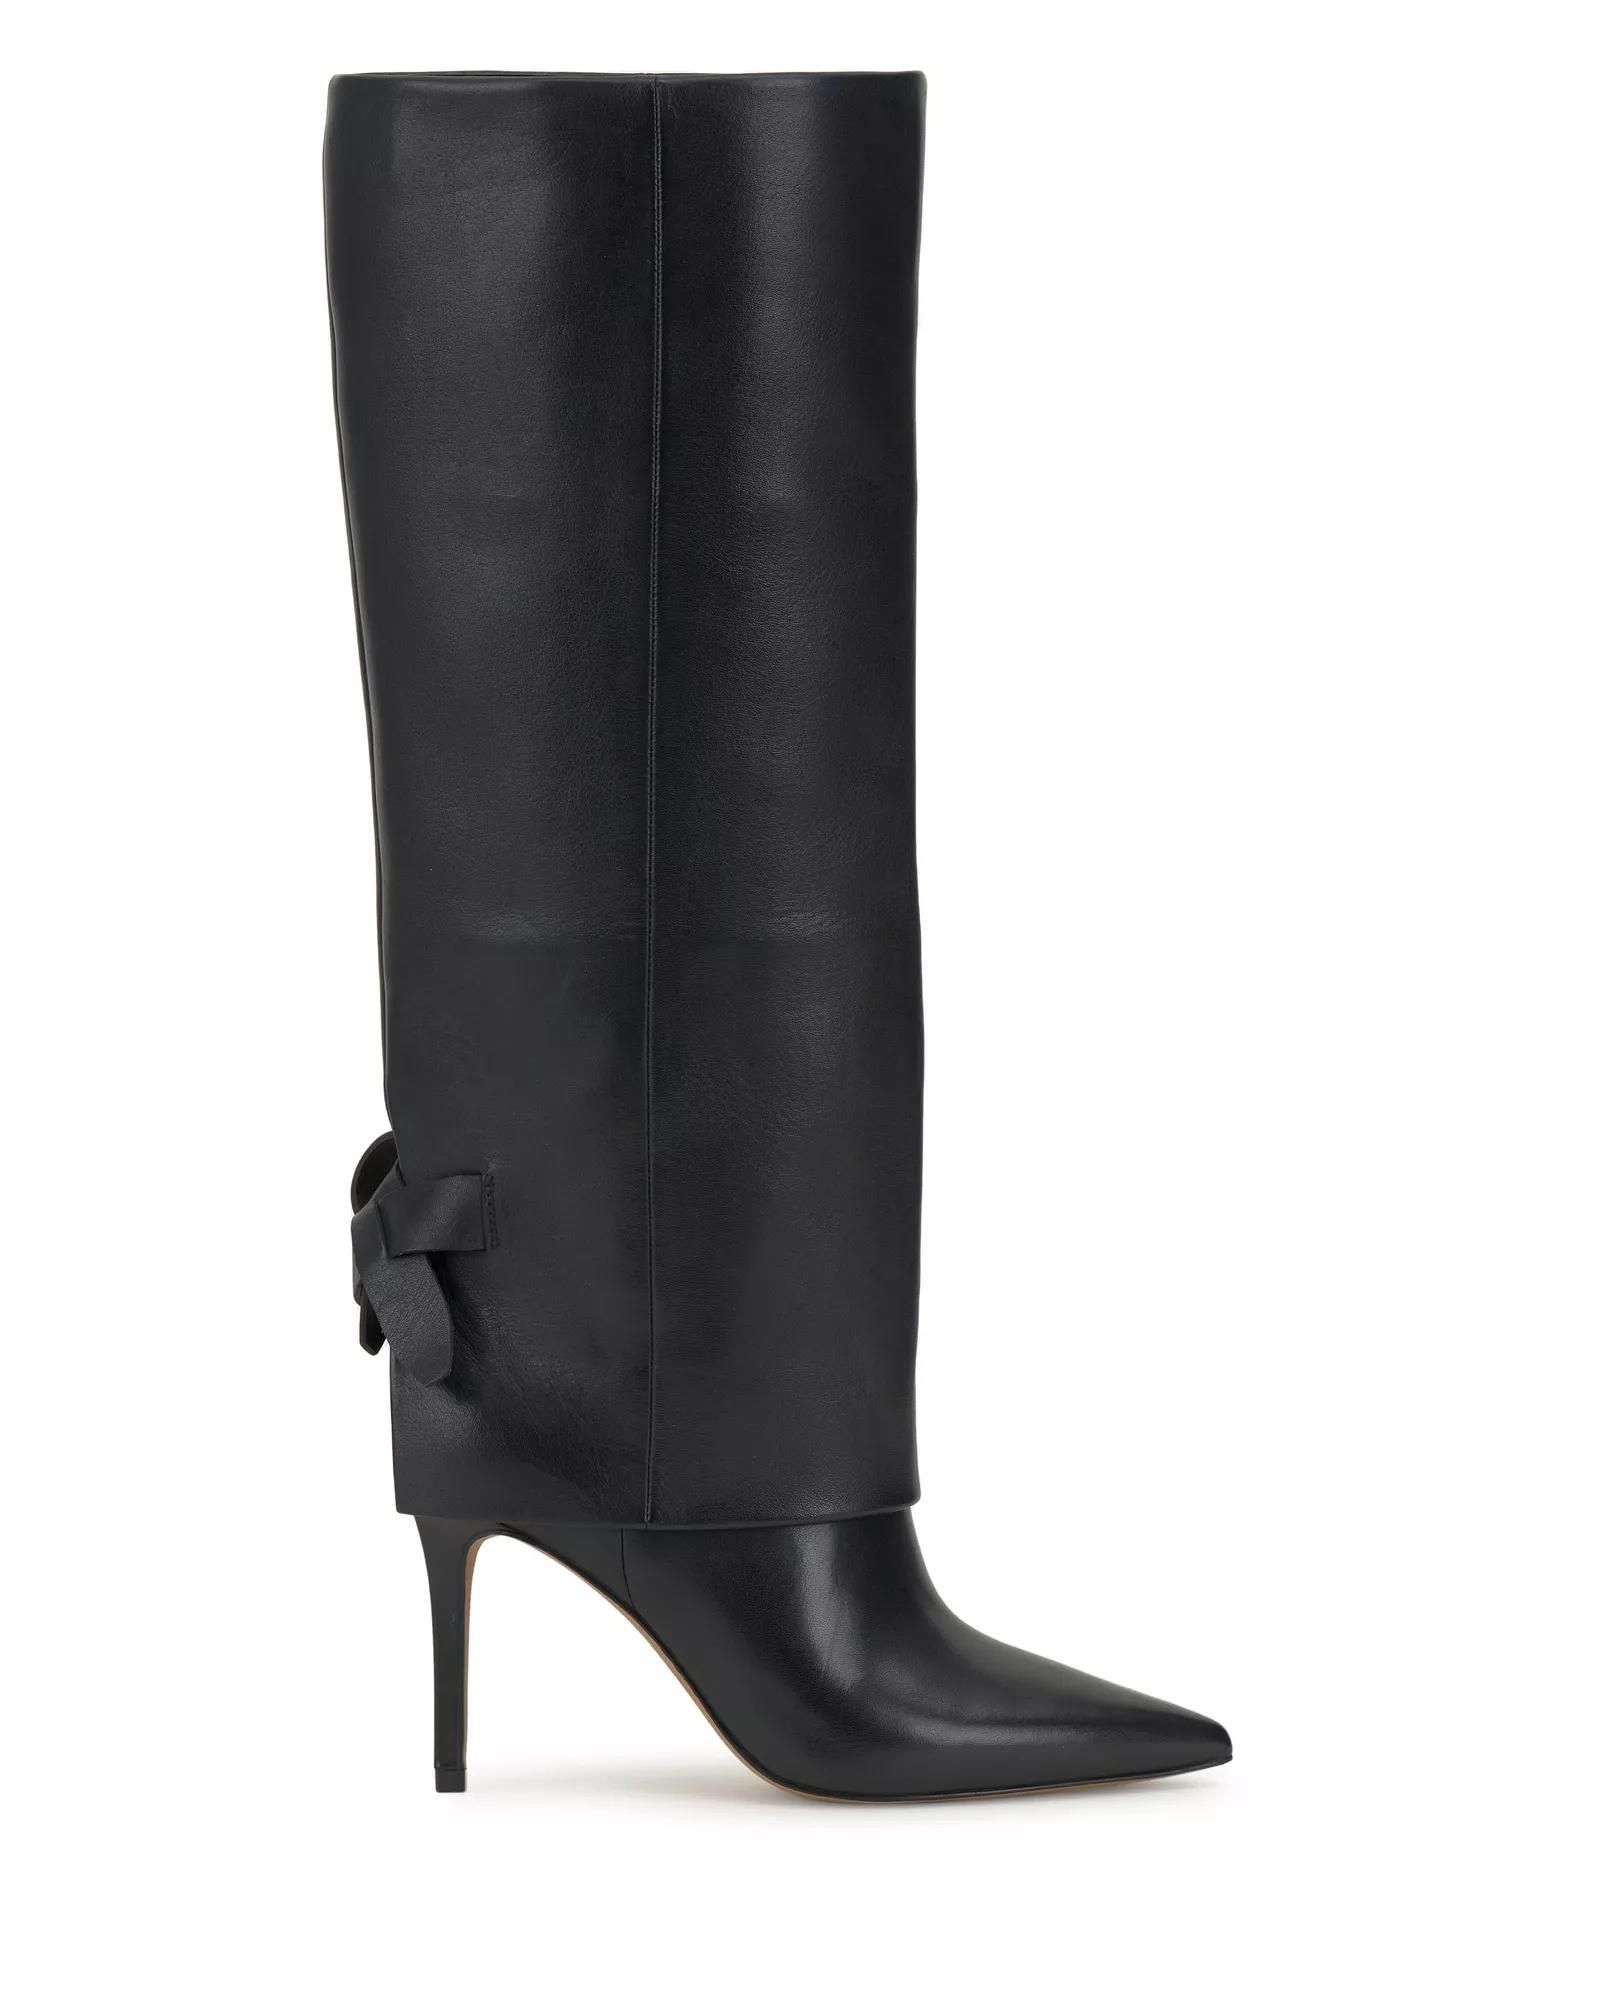 Vince Camuto Kammitie Boot | Vince Camuto